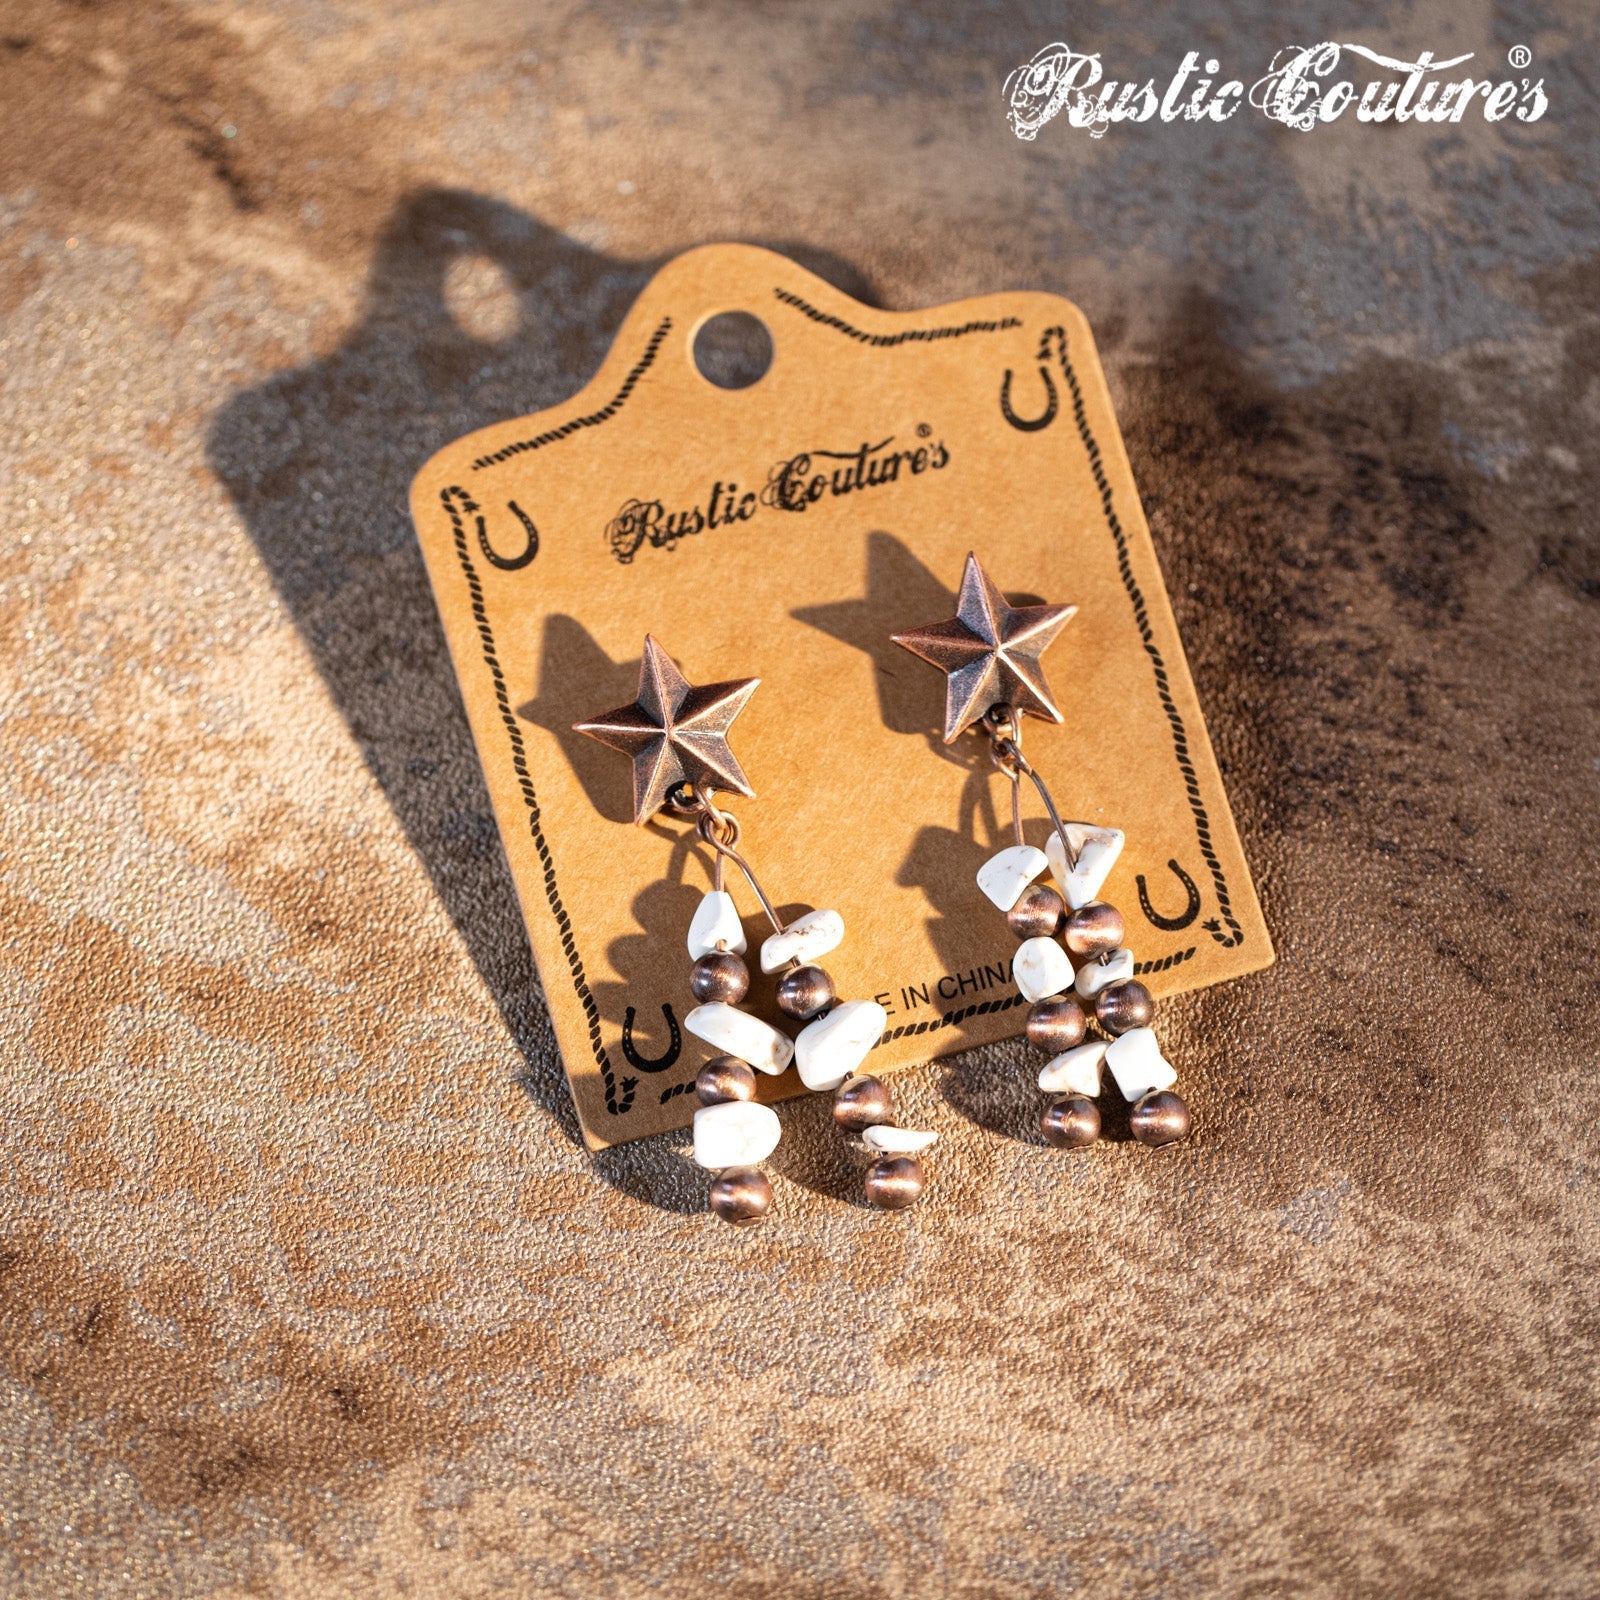 Rustic Couture's Metal Star Chips W/Seed Beads Dangle Earring - Montana West World